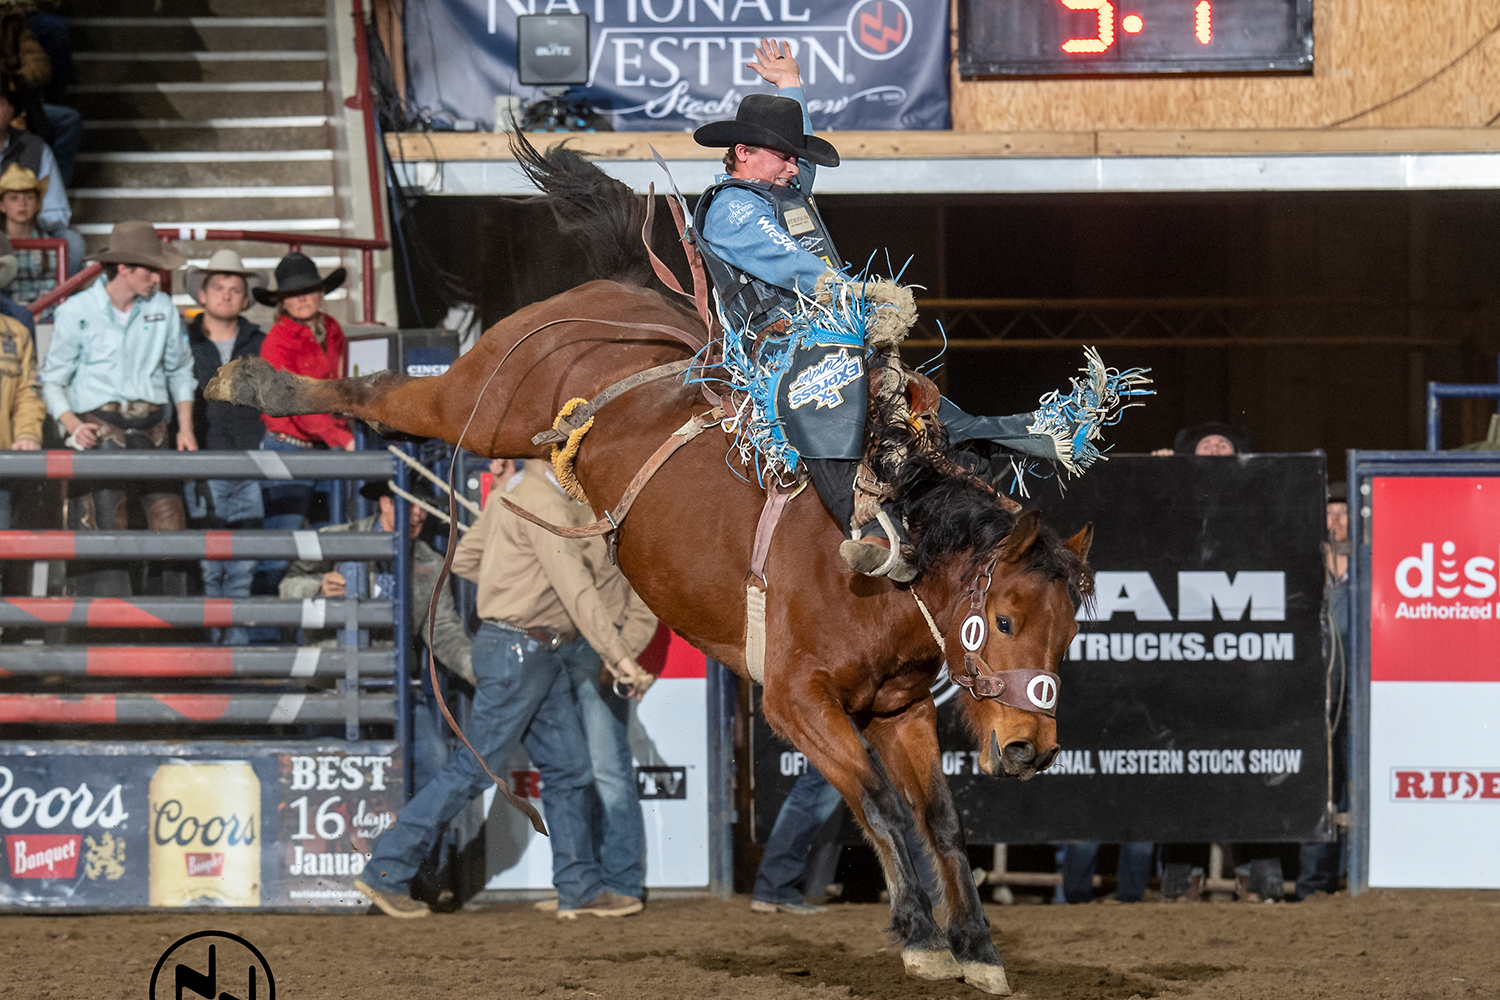 Athletes connected to the national western stock show rodeos